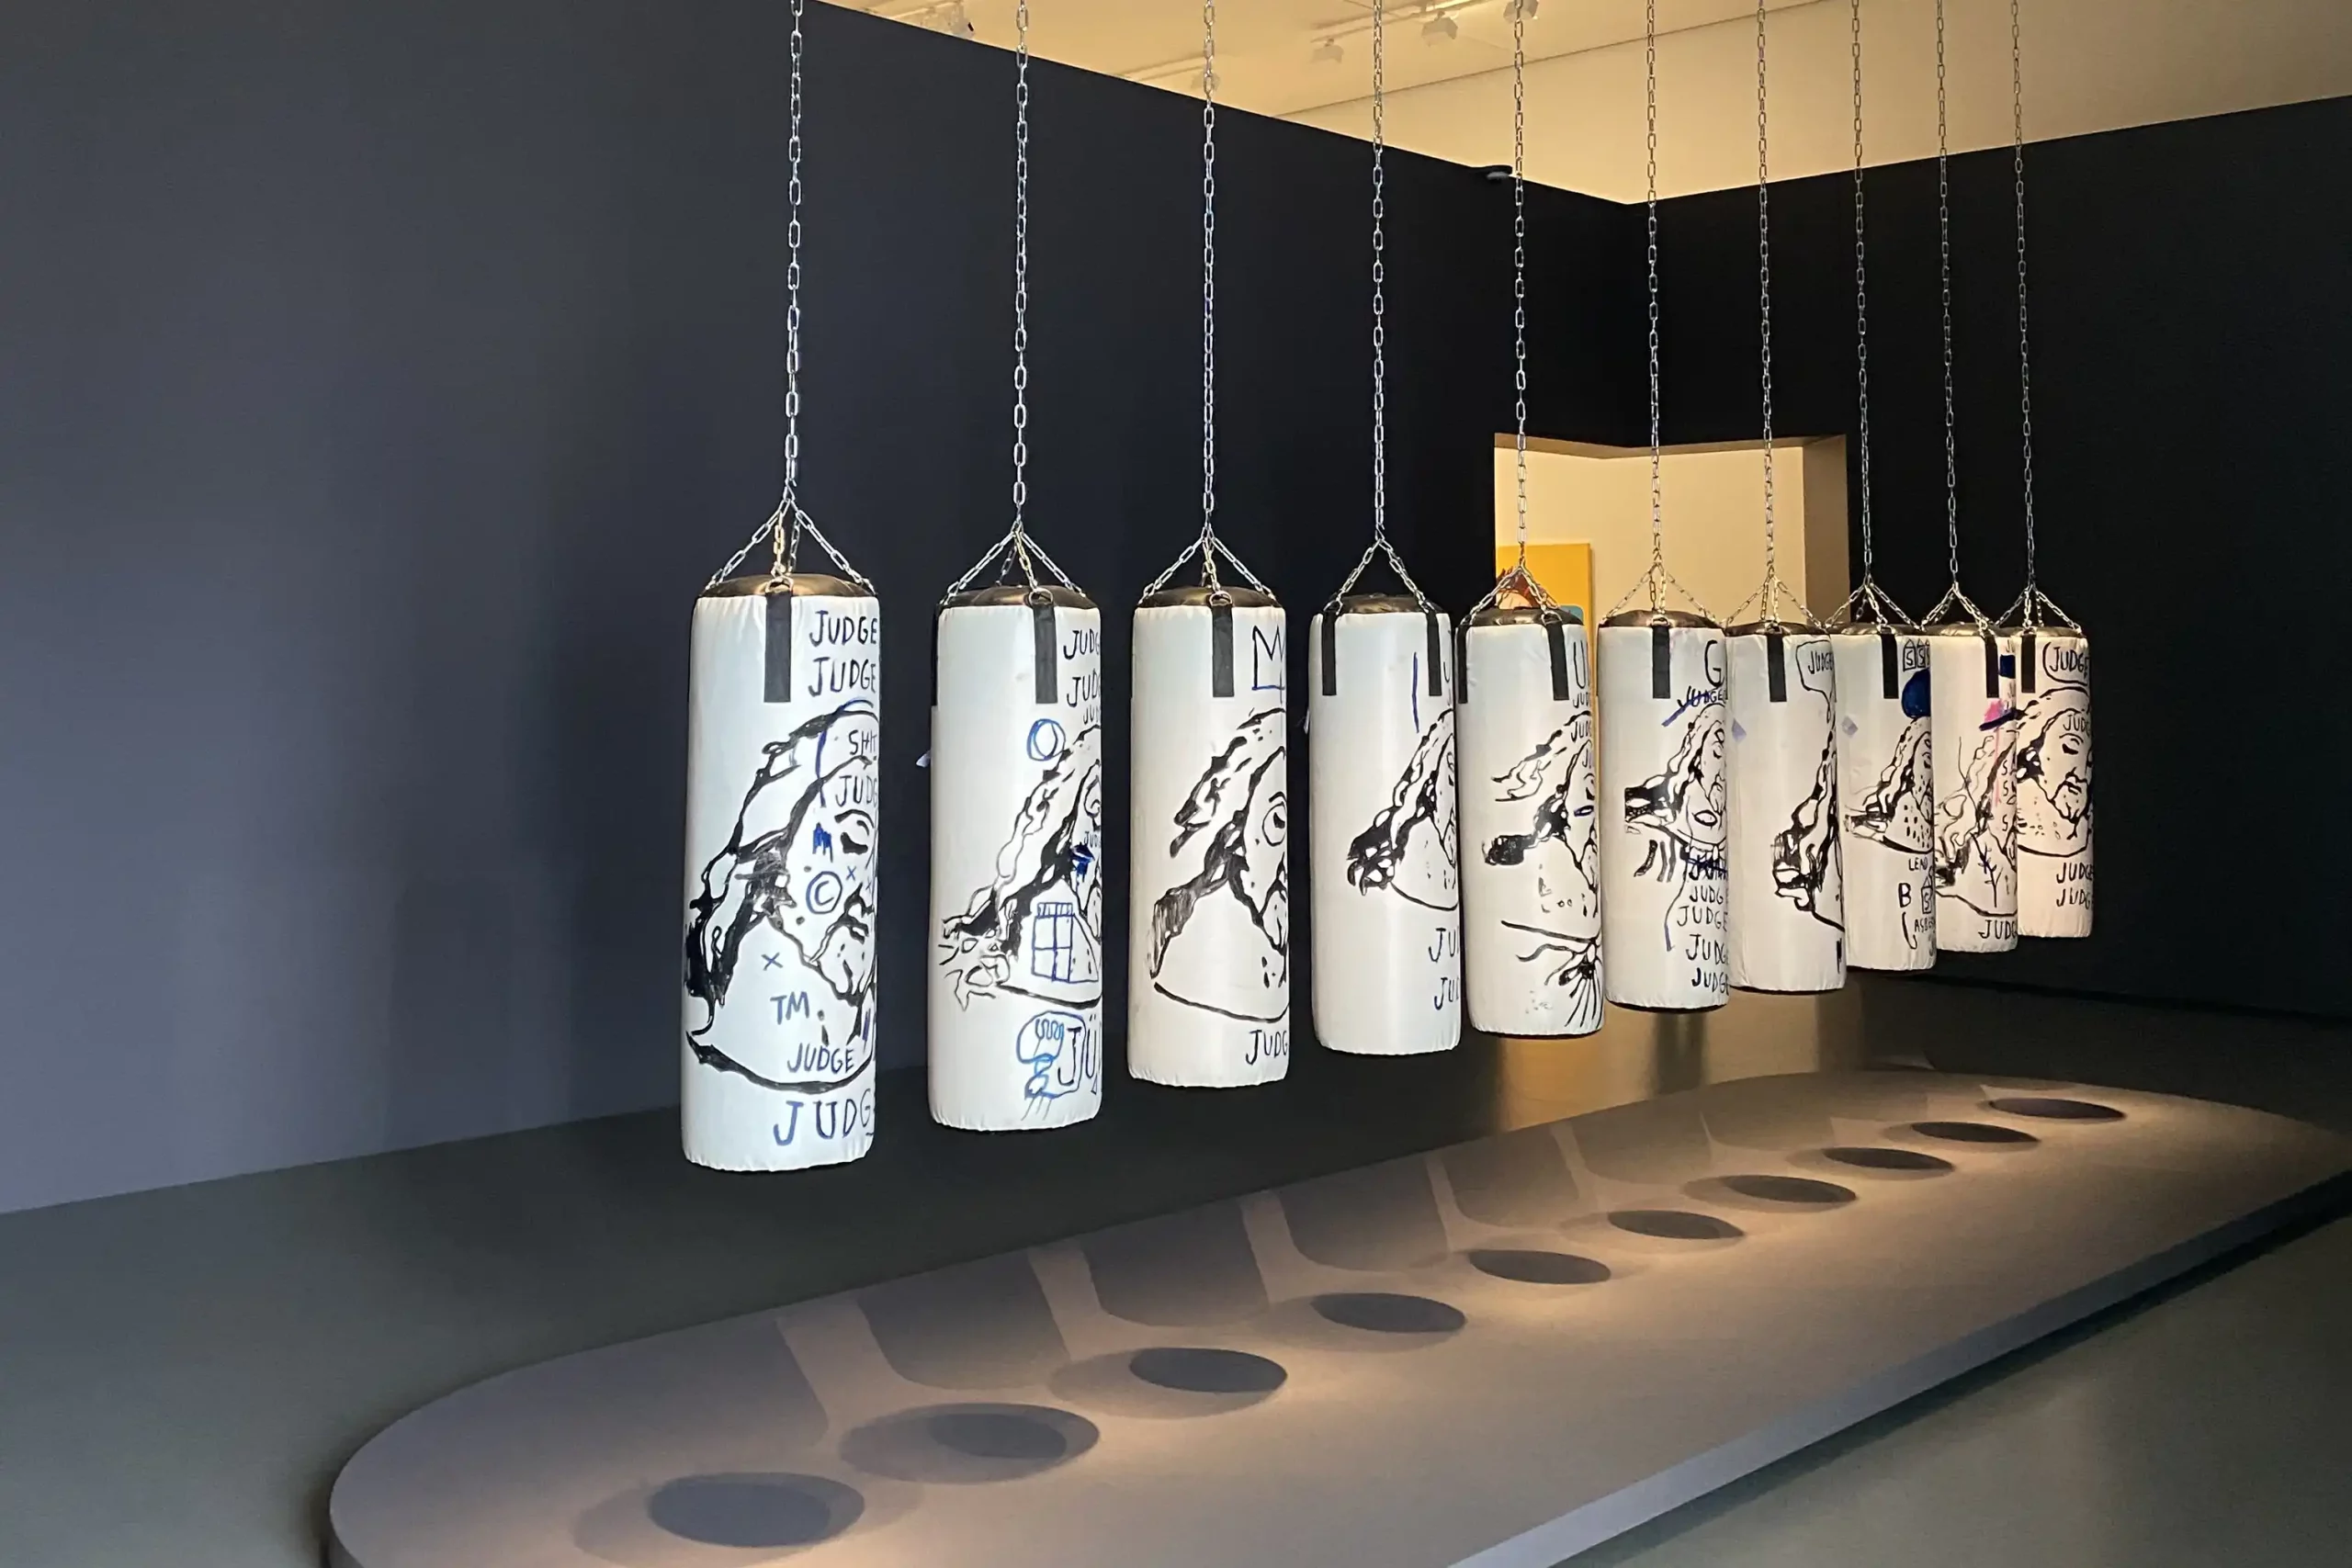 Andy Warhol and Jean-Michel Basquiat exhibition on display at Foundation Louis Vuitton